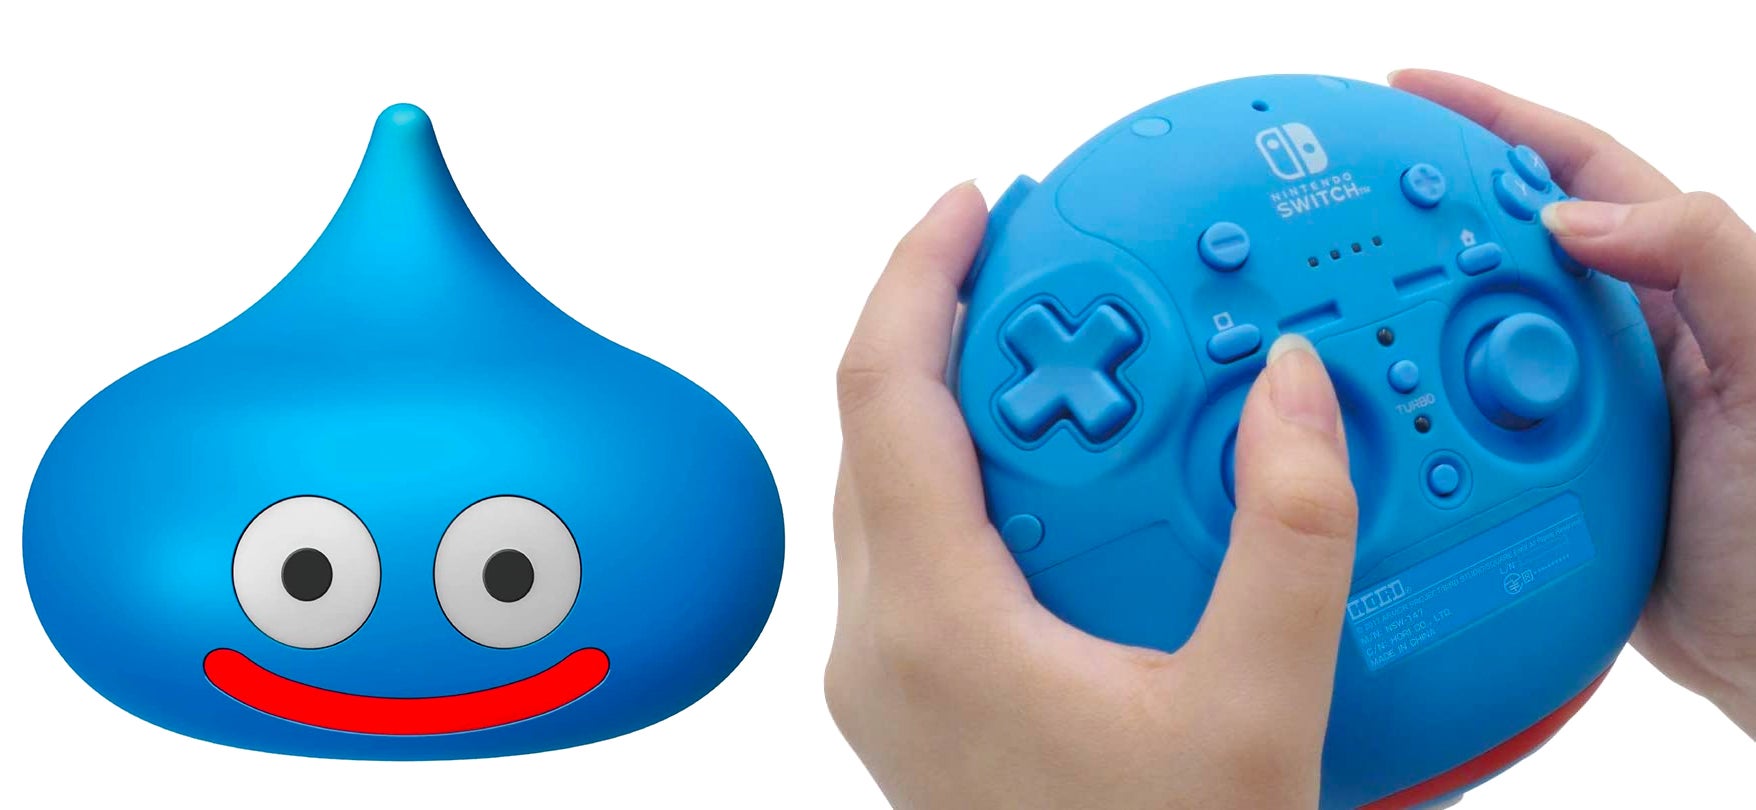 The Most Cursed Video Game Controllers of All Time